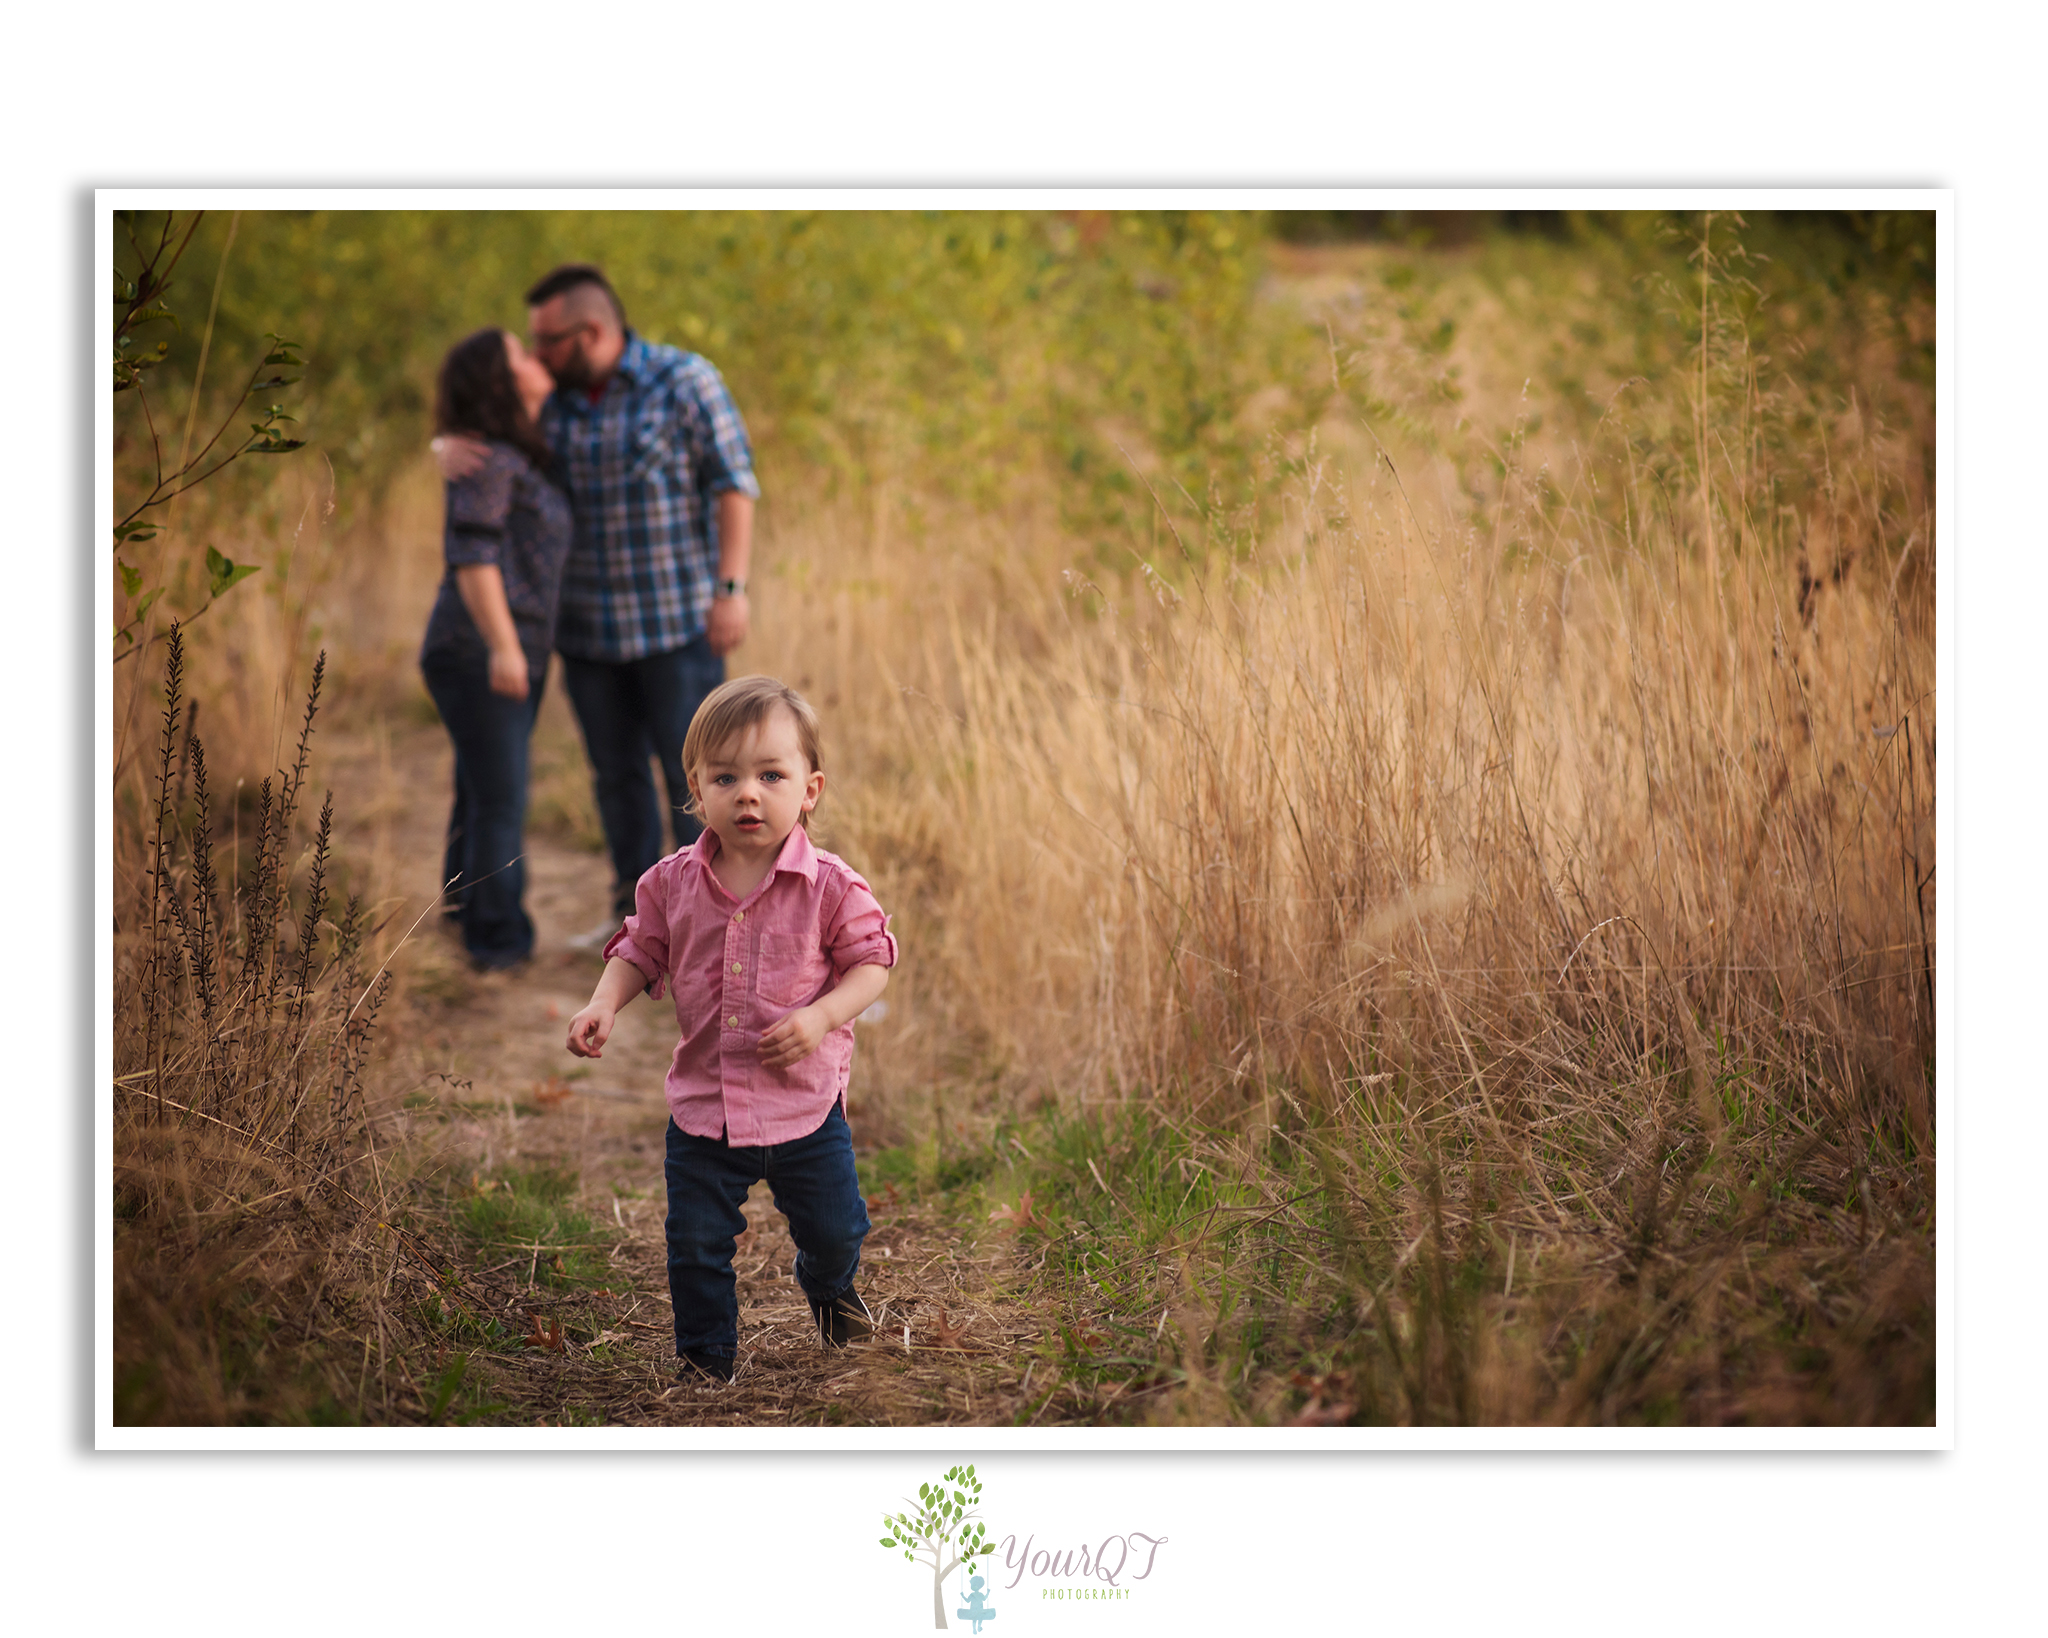 Schultz Family Preview husband and wife kissing in a field while boy is running towards camera